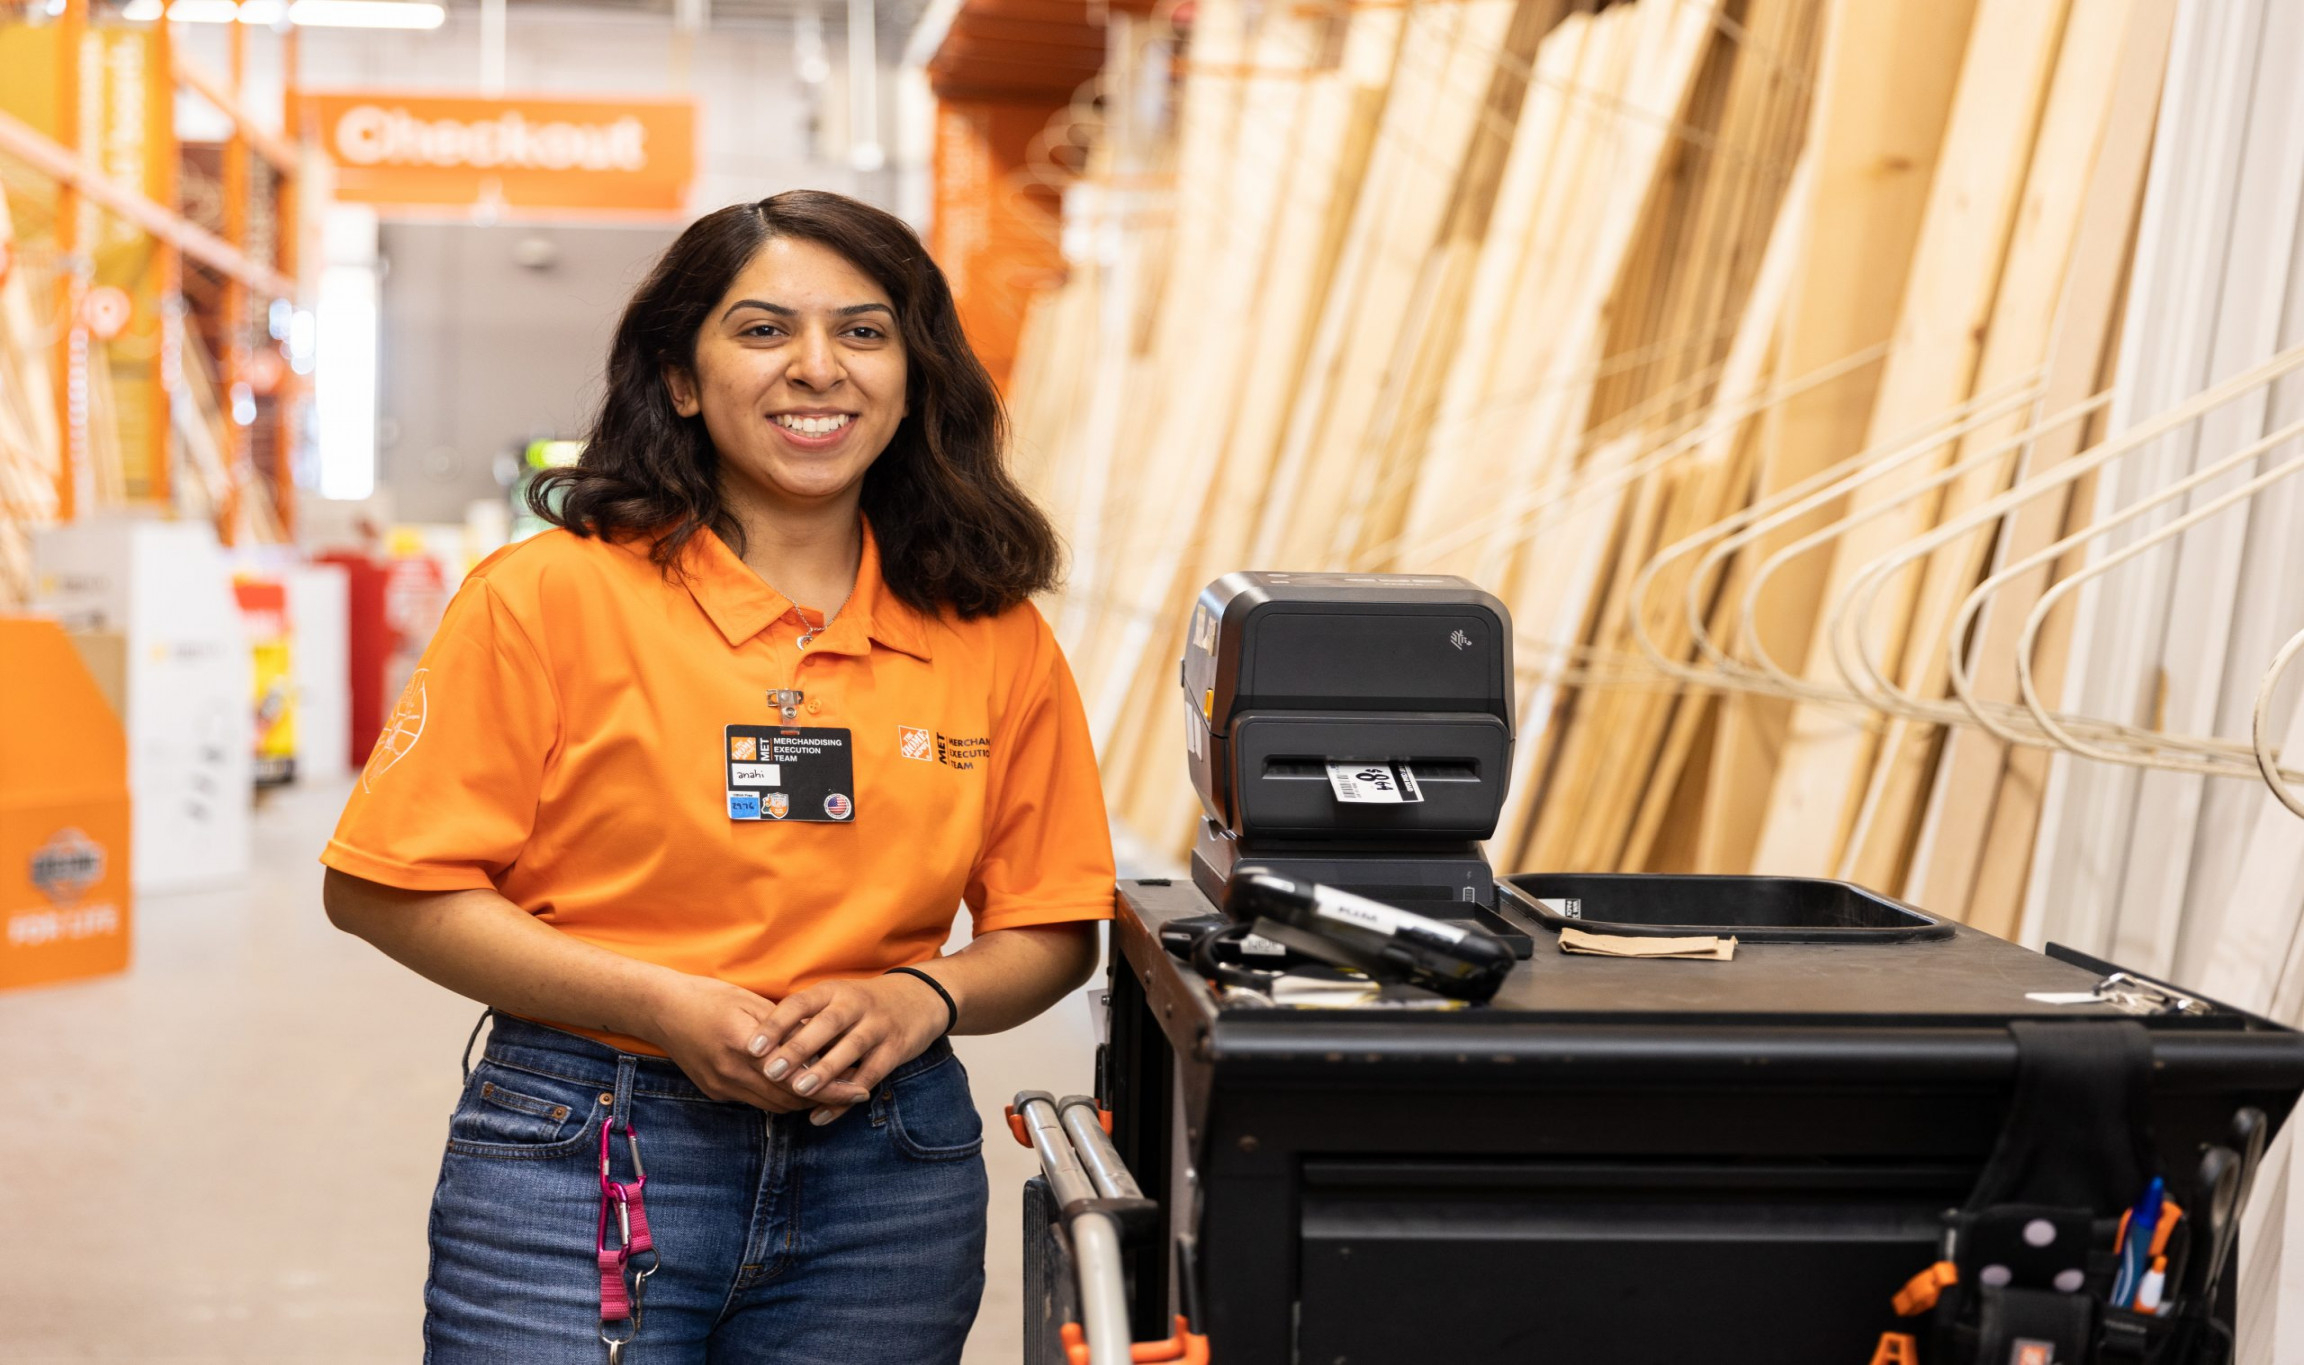 MERCHANDISING - Greeley, CO  Jobs at The Home Depot